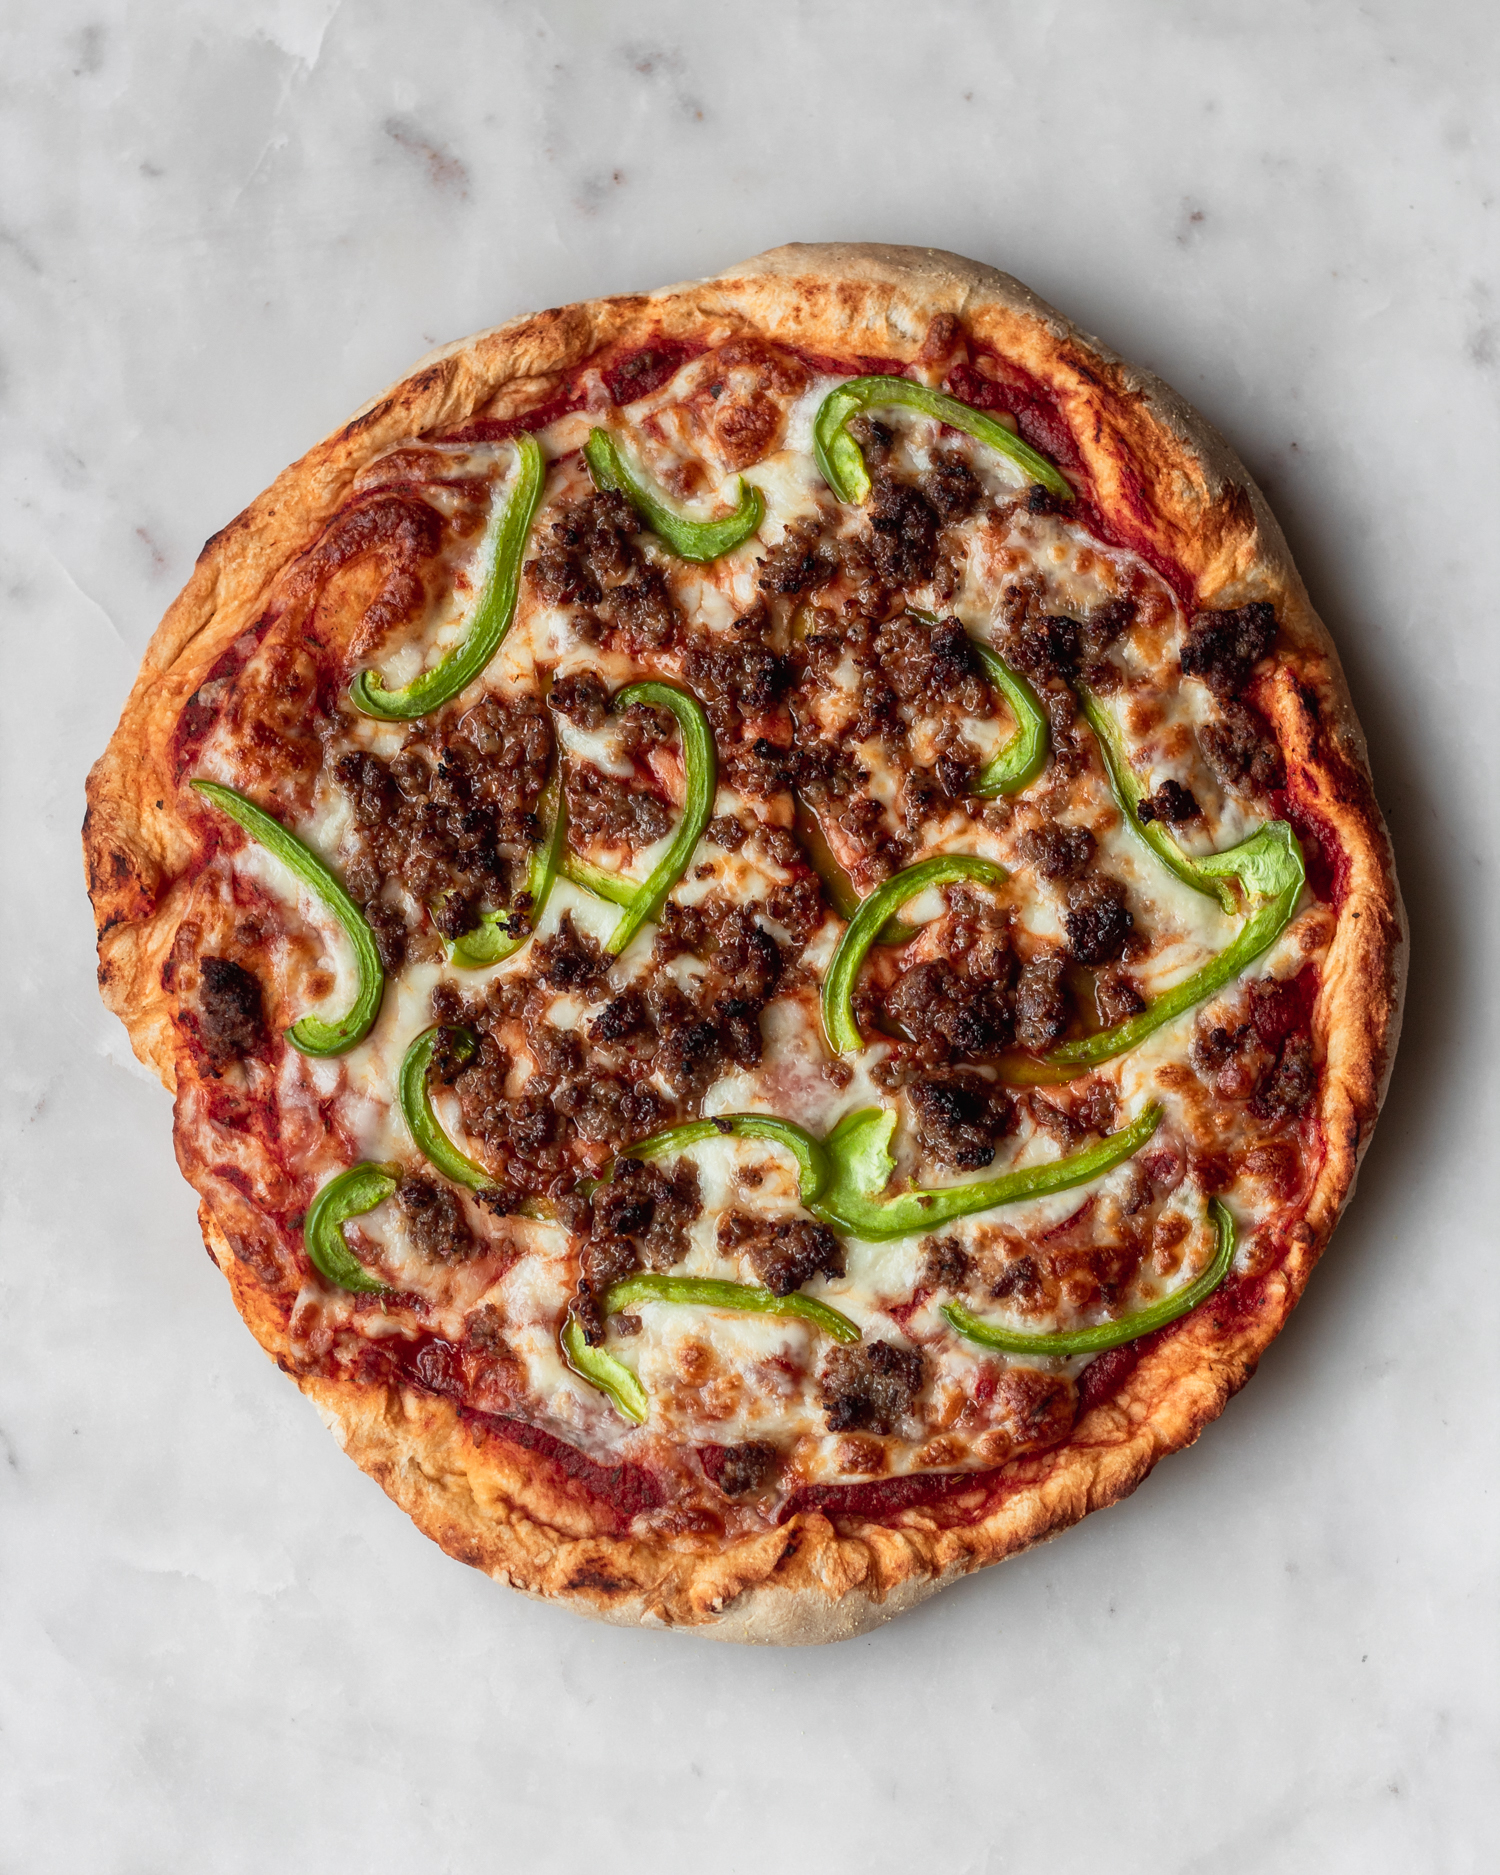 A bird's eye view of homemade pizza, one of my favorite pantry staple meals, with sausage and green peppers on a white marble background.